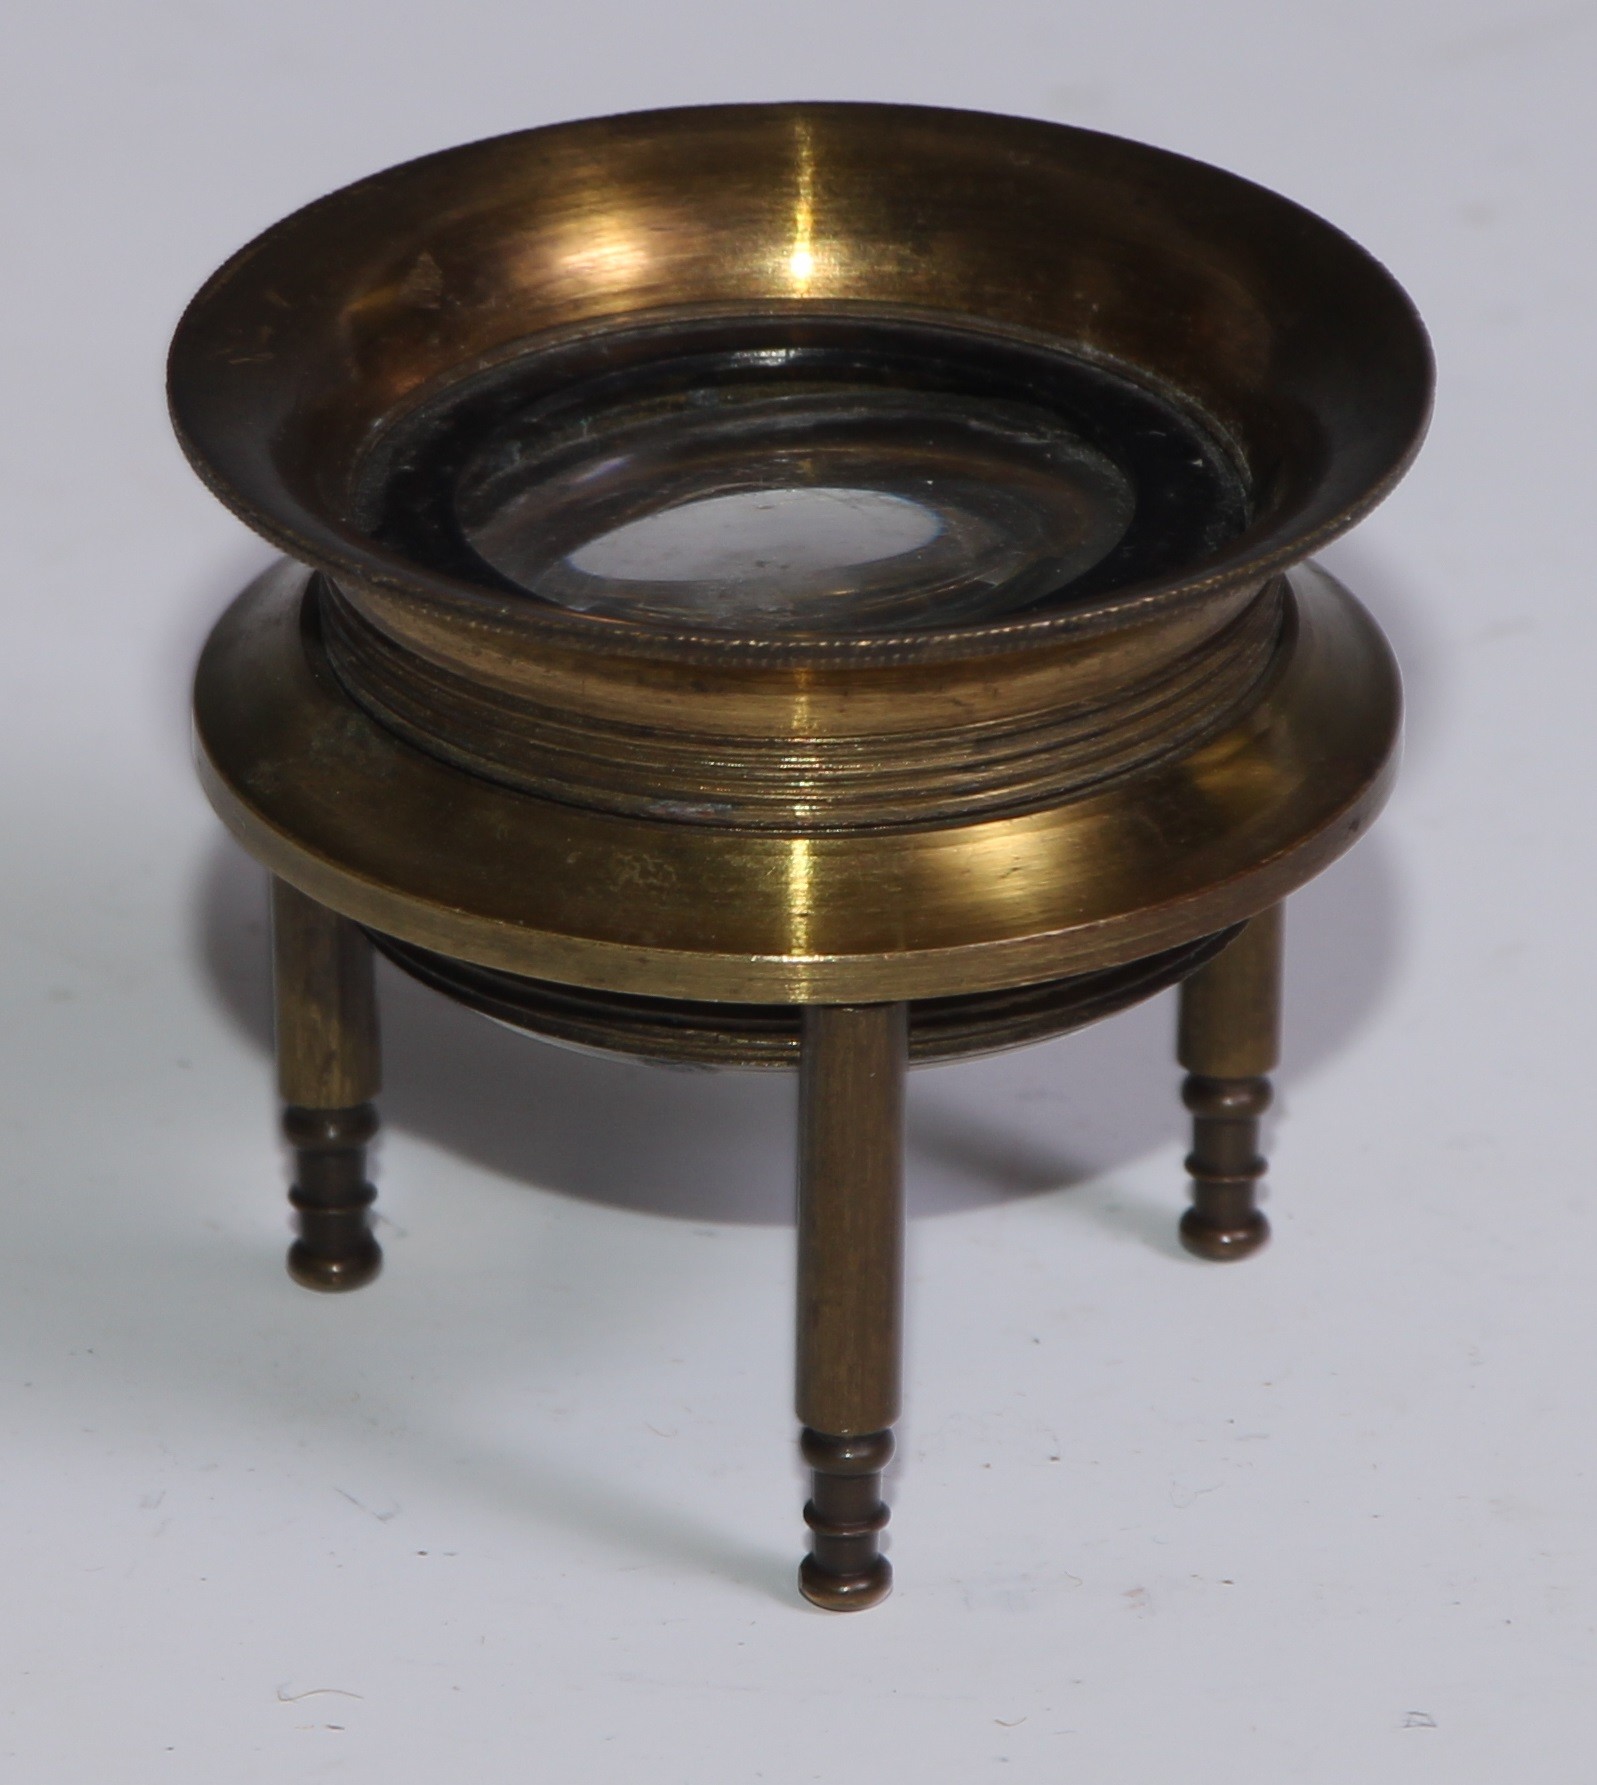 Cartography - an early 20th century lacquered brass tripod map reading lens, 4.5cm diam - Image 2 of 2